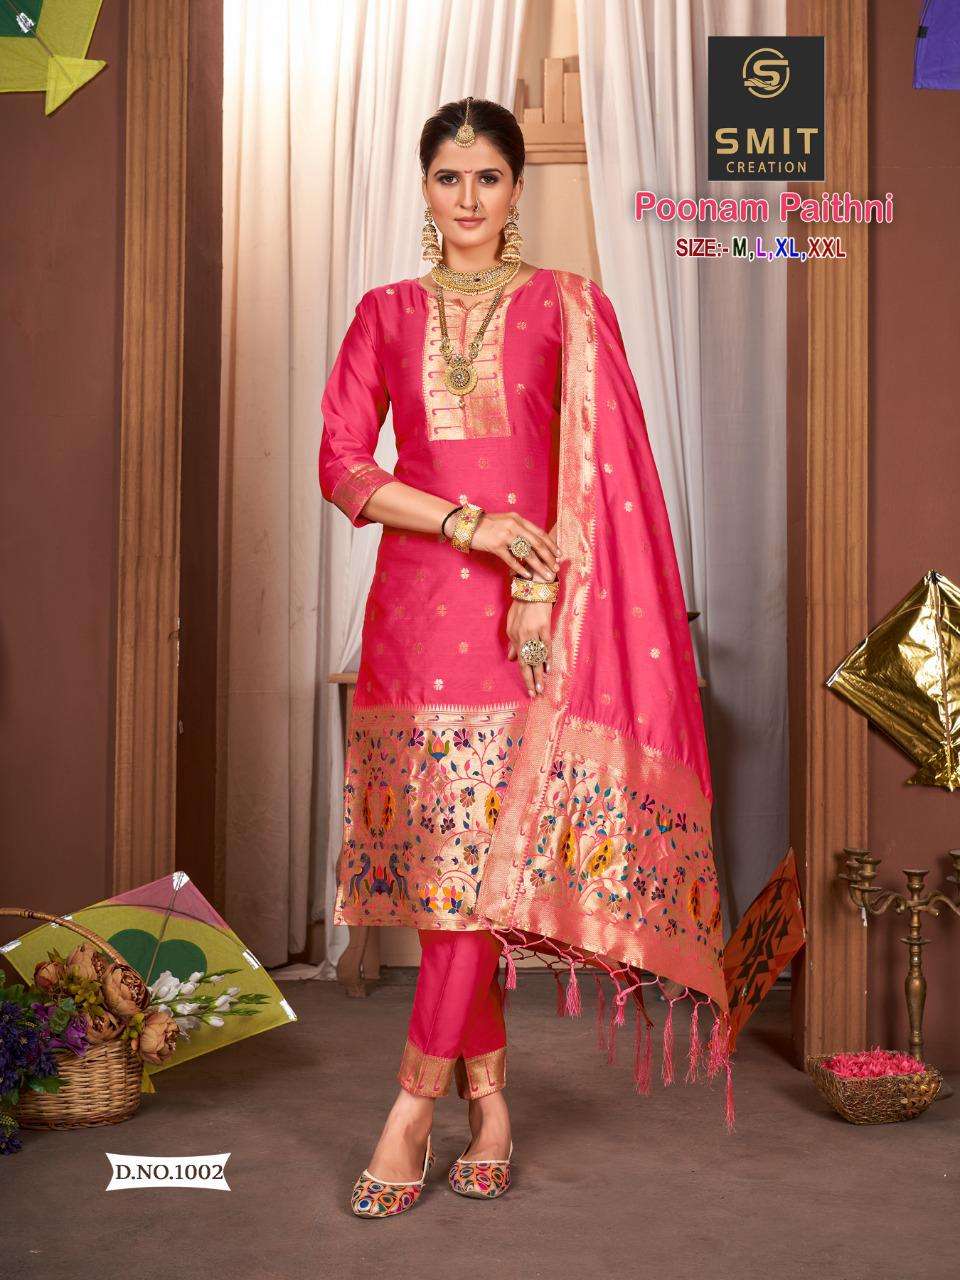 smit creation poonam paithni 1001-1006 series top bottom with dupatta suits new catalogue